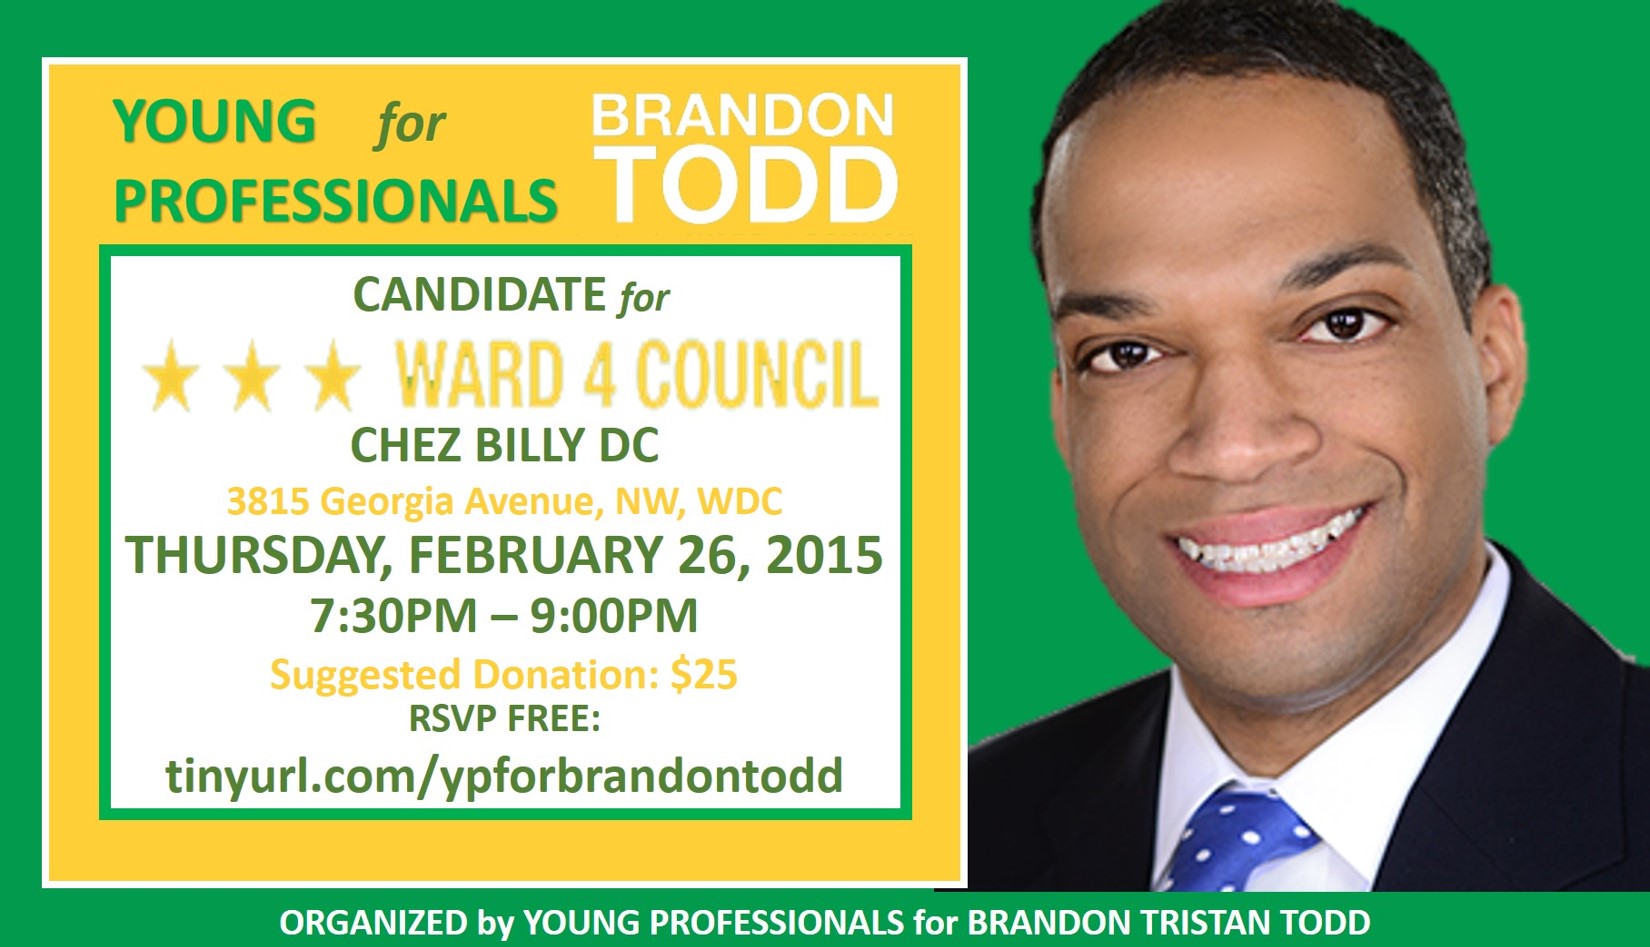 Support this campaign event to elect Brandon Tristan Todd to Ward 4 City Council seat. - btoddflierfn